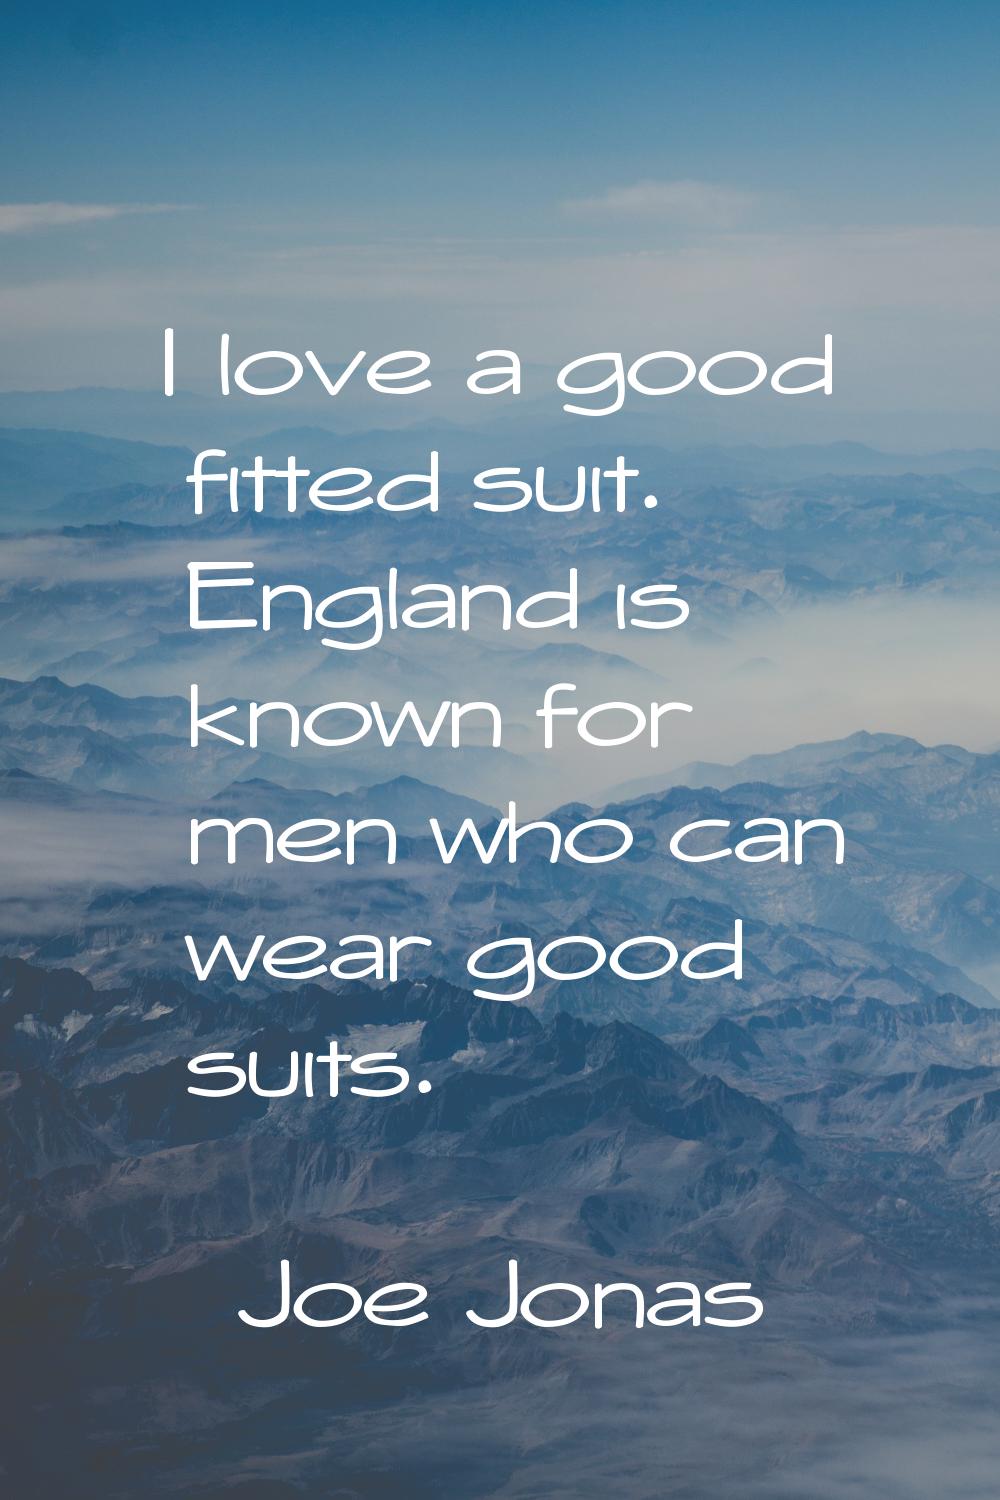 I love a good fitted suit. England is known for men who can wear good suits.